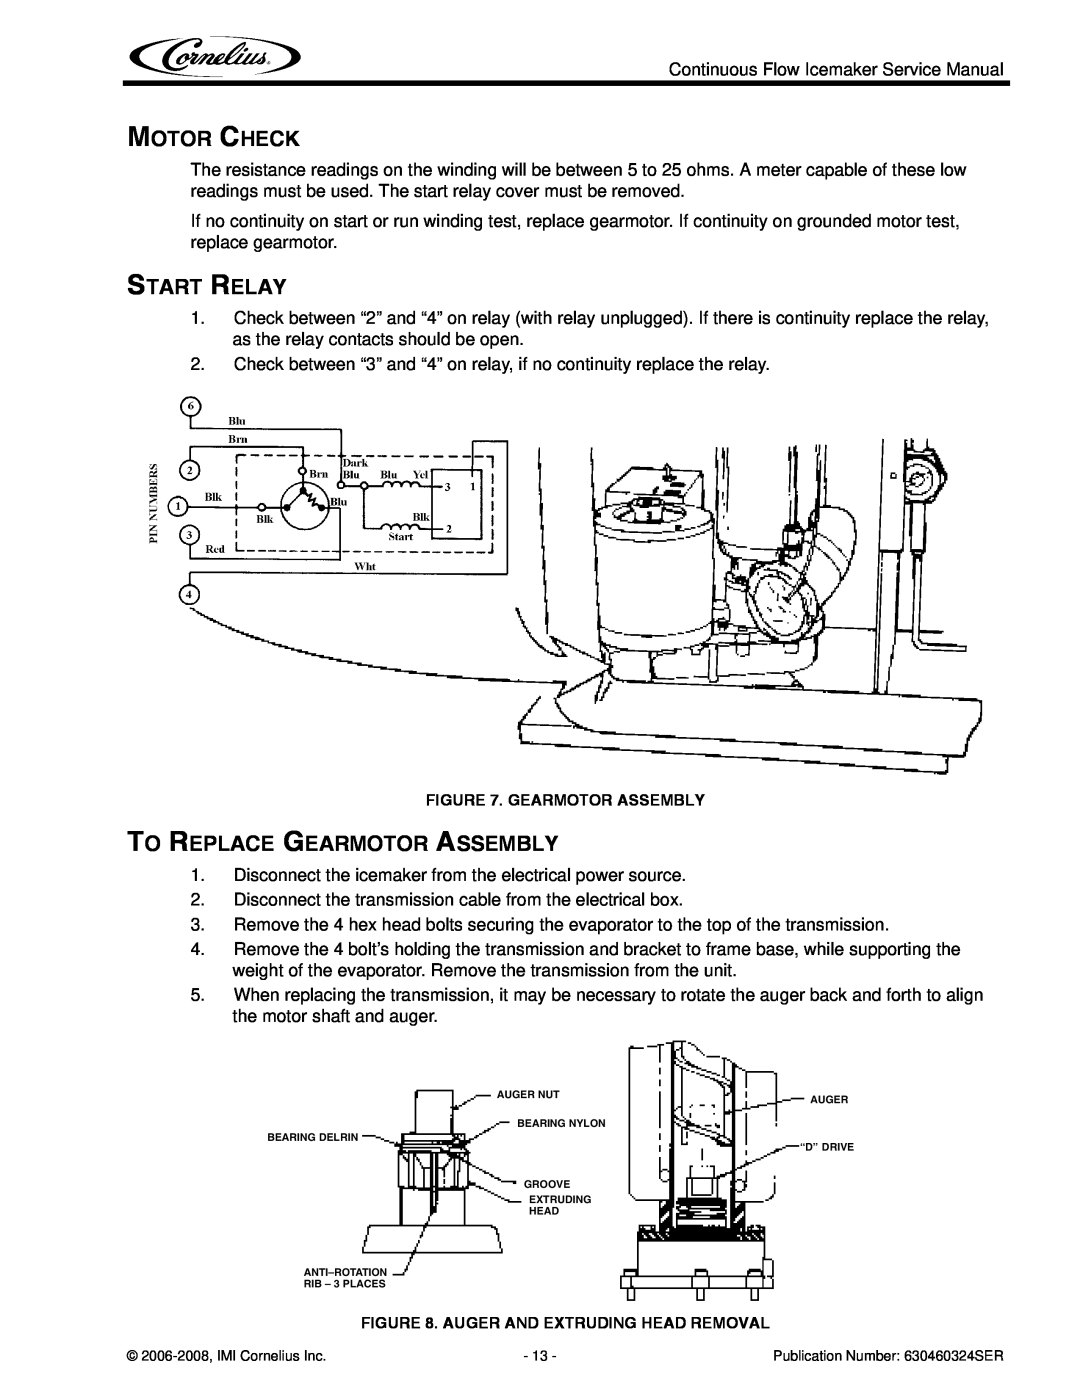 Cornelius WCC1401-A service manual Motor Check, Start Relay, To Replace Gearmotor Assembly 